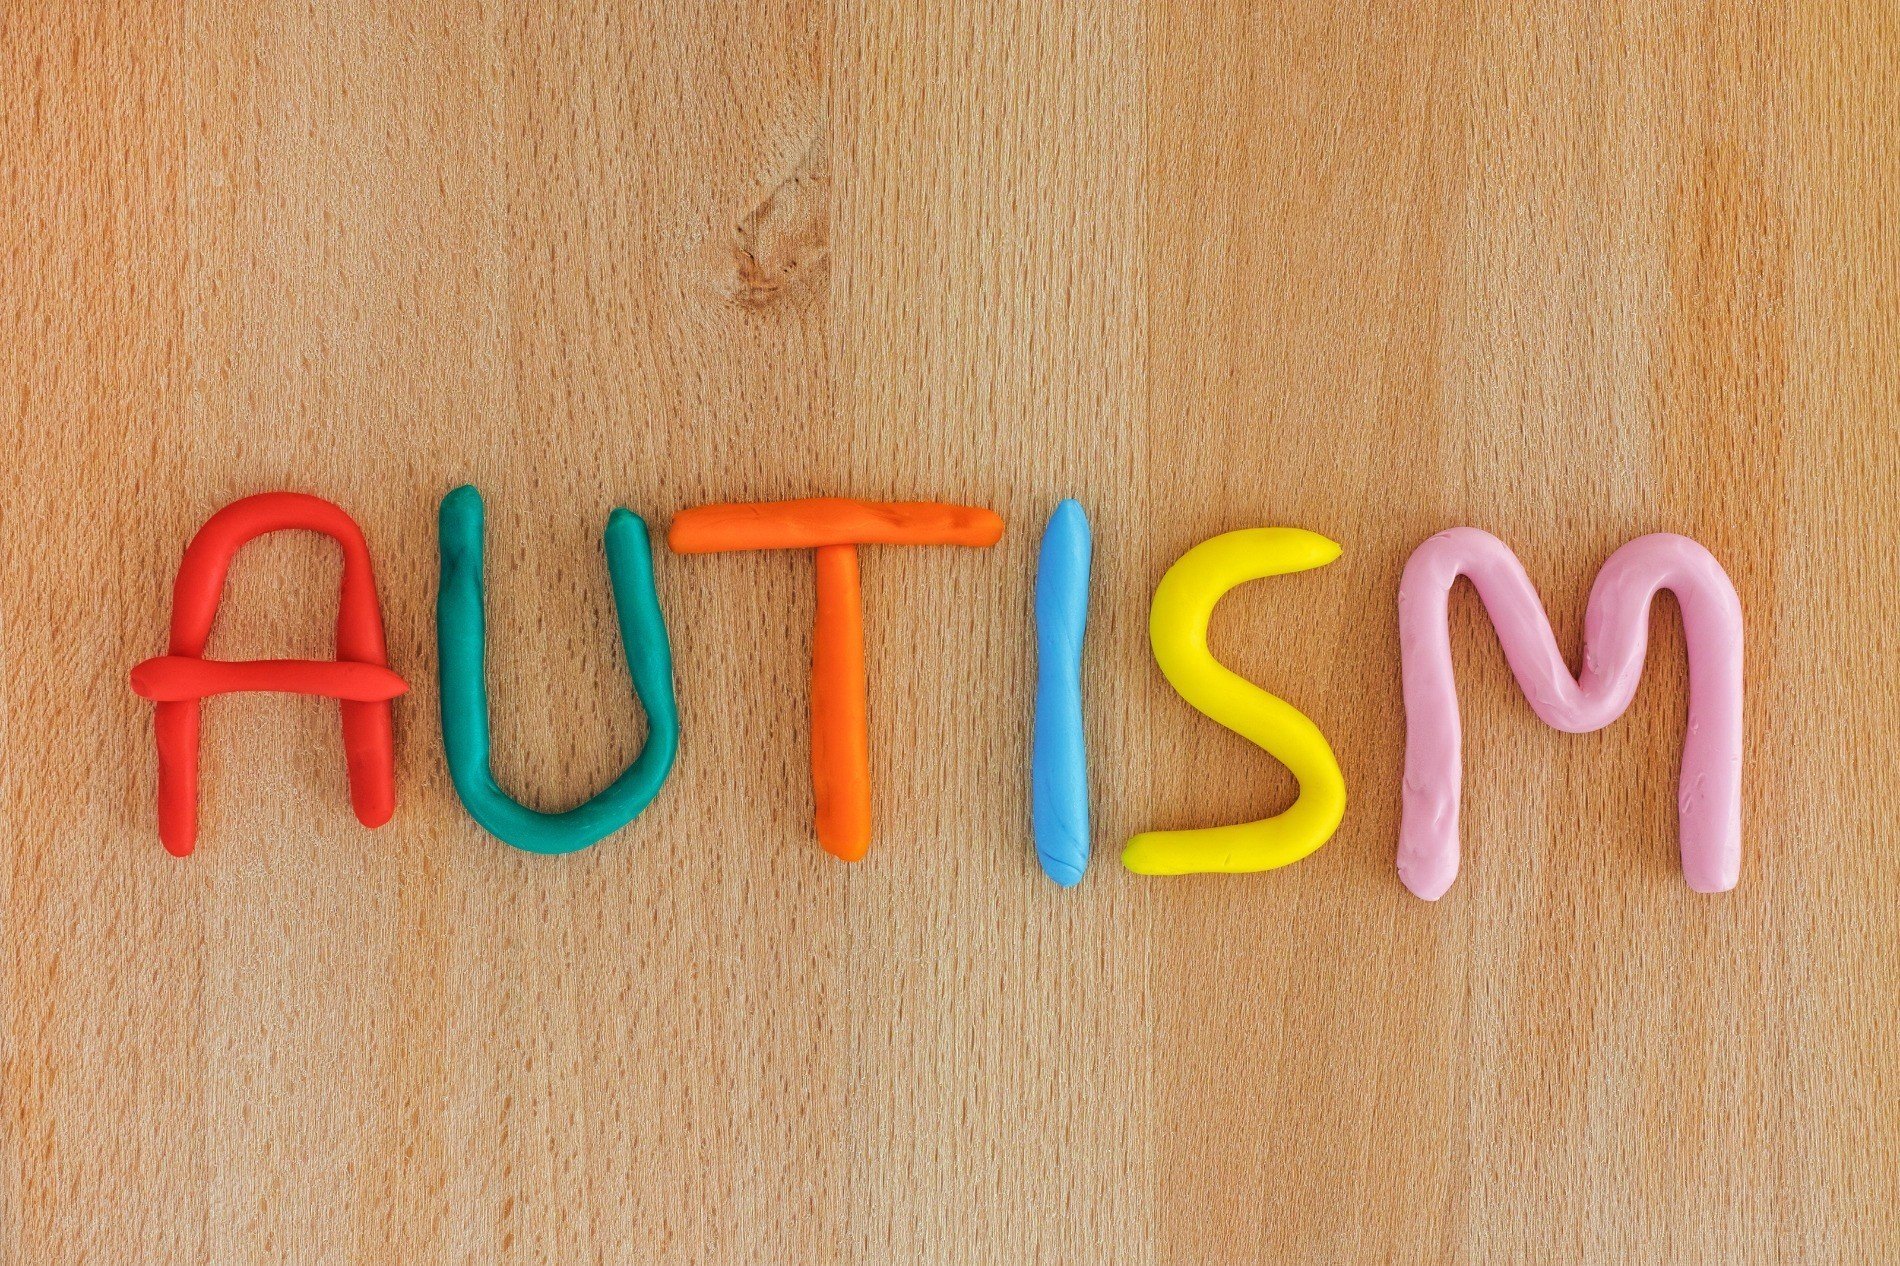 Does my child show symptoms of Autism?